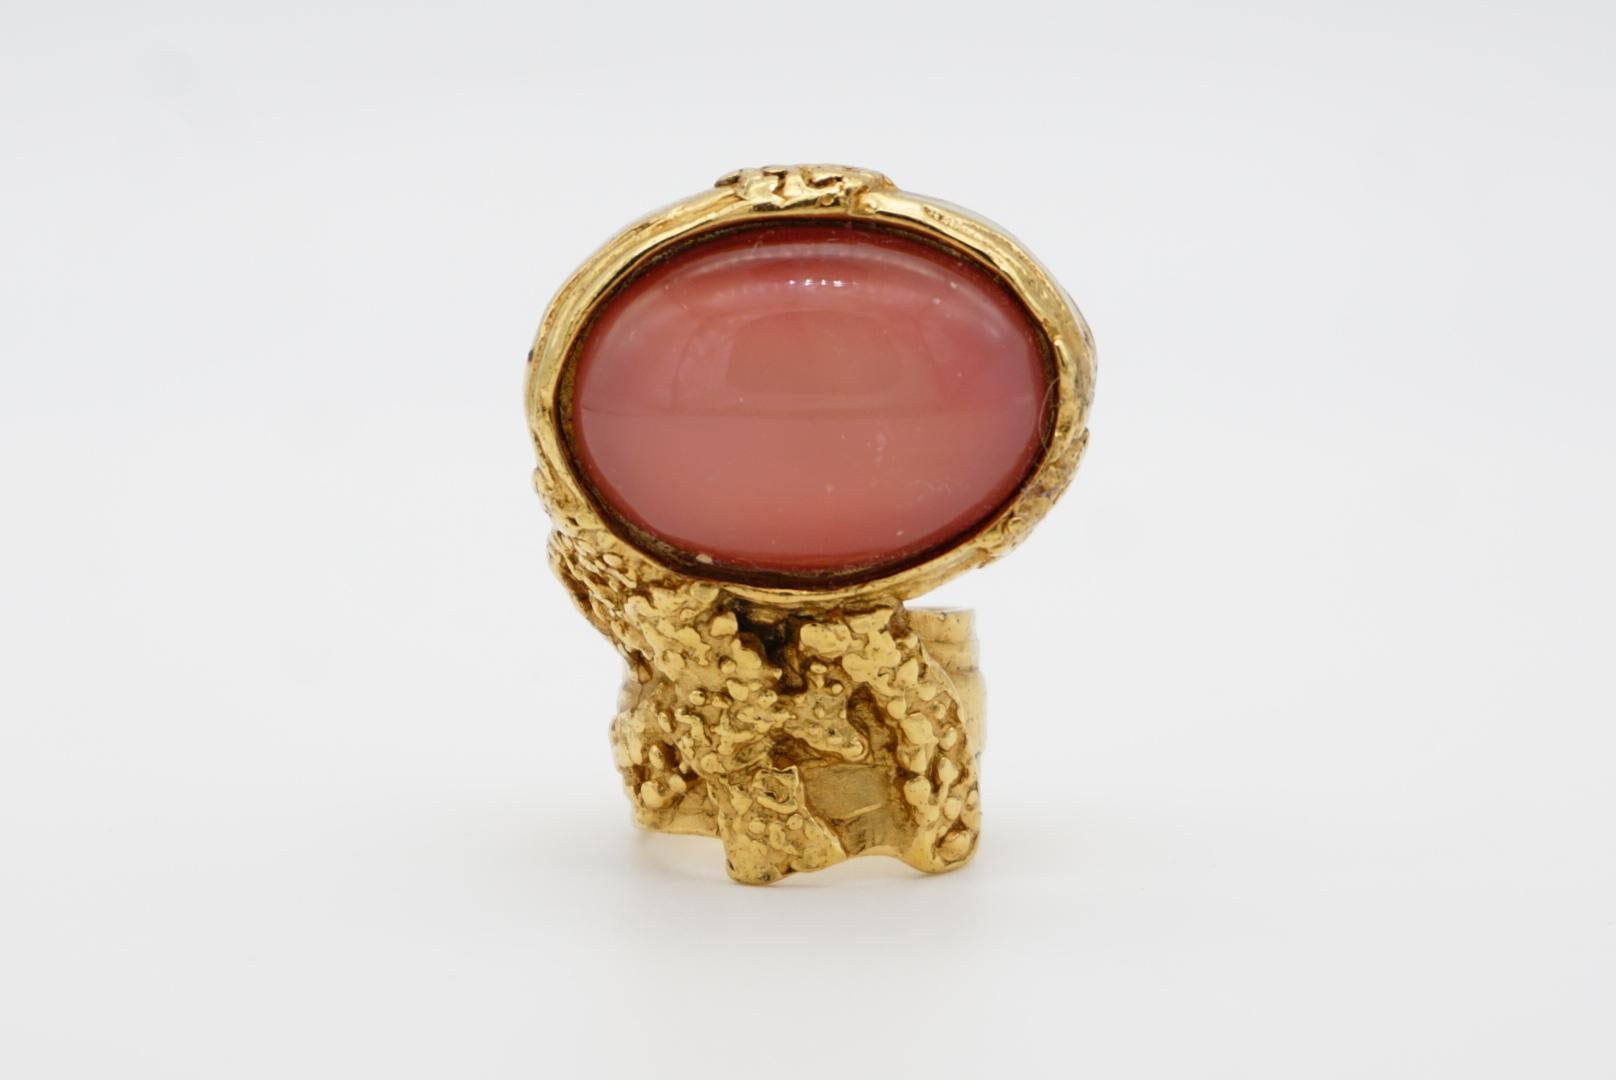 Yves Saint Laurent YSL Arty Clear Soft Pink Cabochon Statement Gold Ring, Size 6 In Excellent Condition For Sale In Wokingham, England